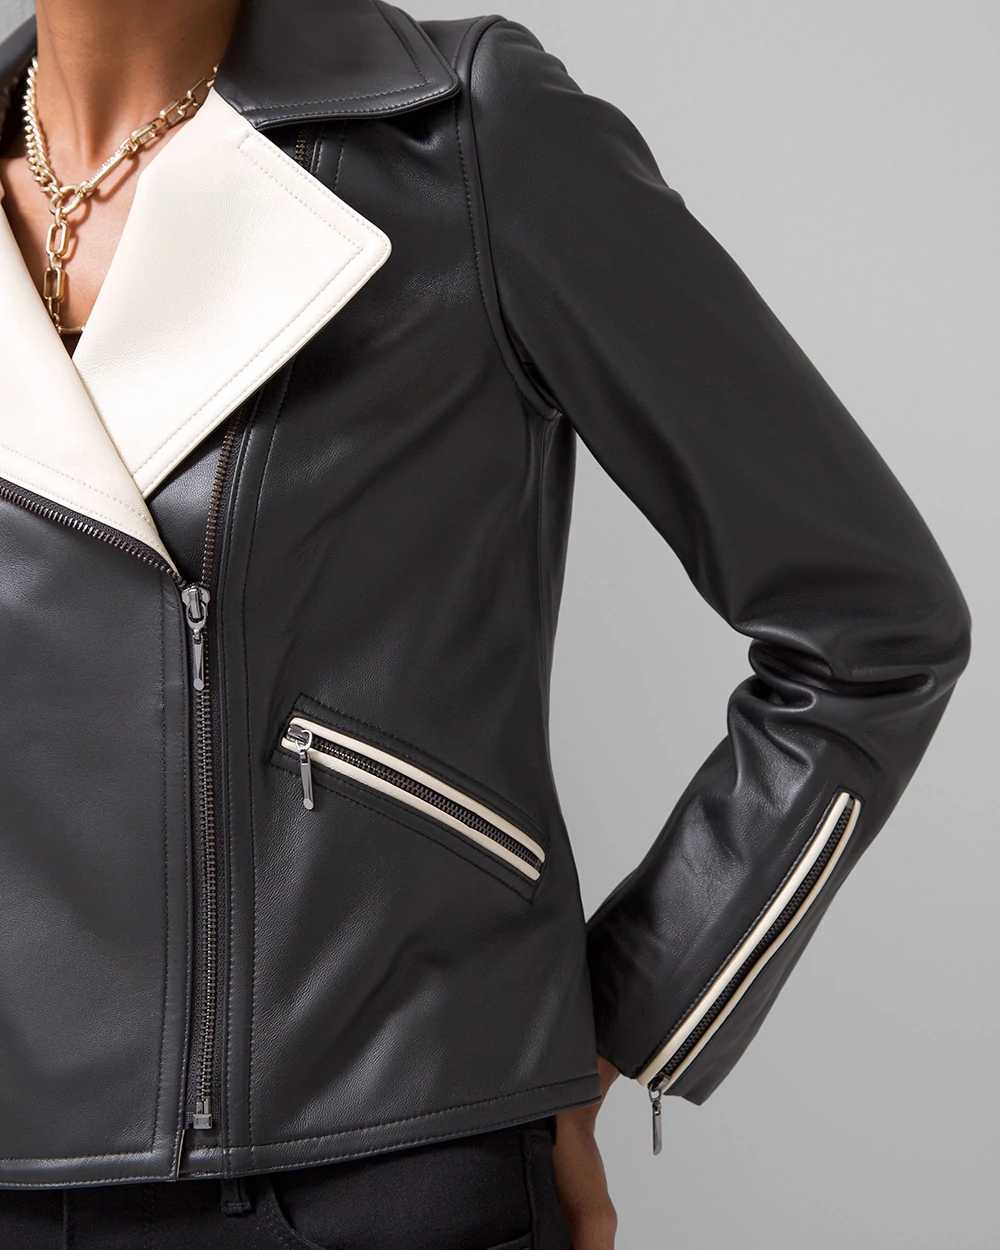 Petite Leather Moto Jacket click to view larger image.